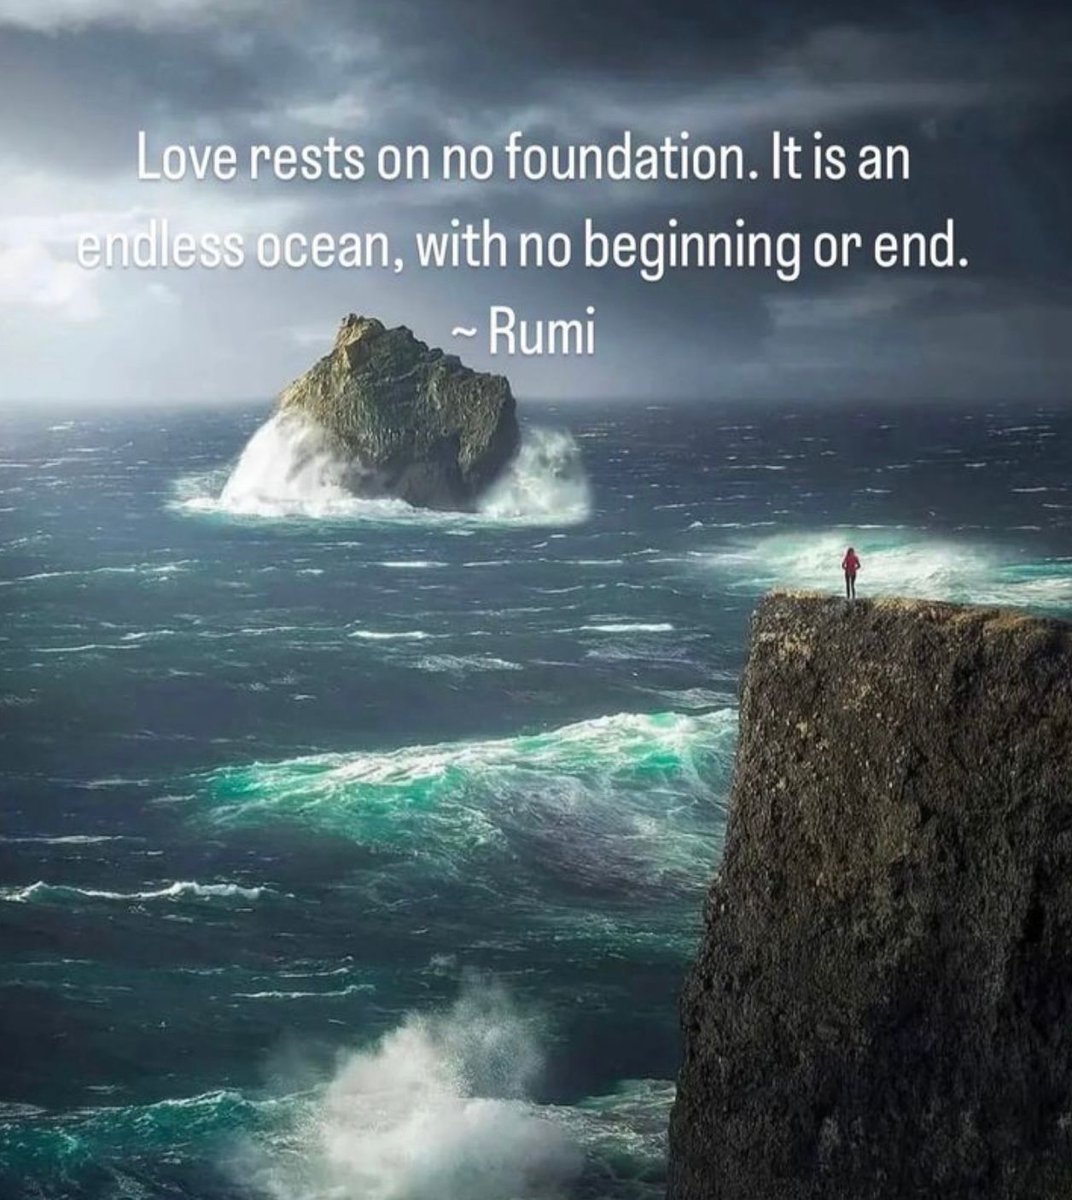 Love rests on no foundation. It is an endless ocean, with no beginning or end. Rumi